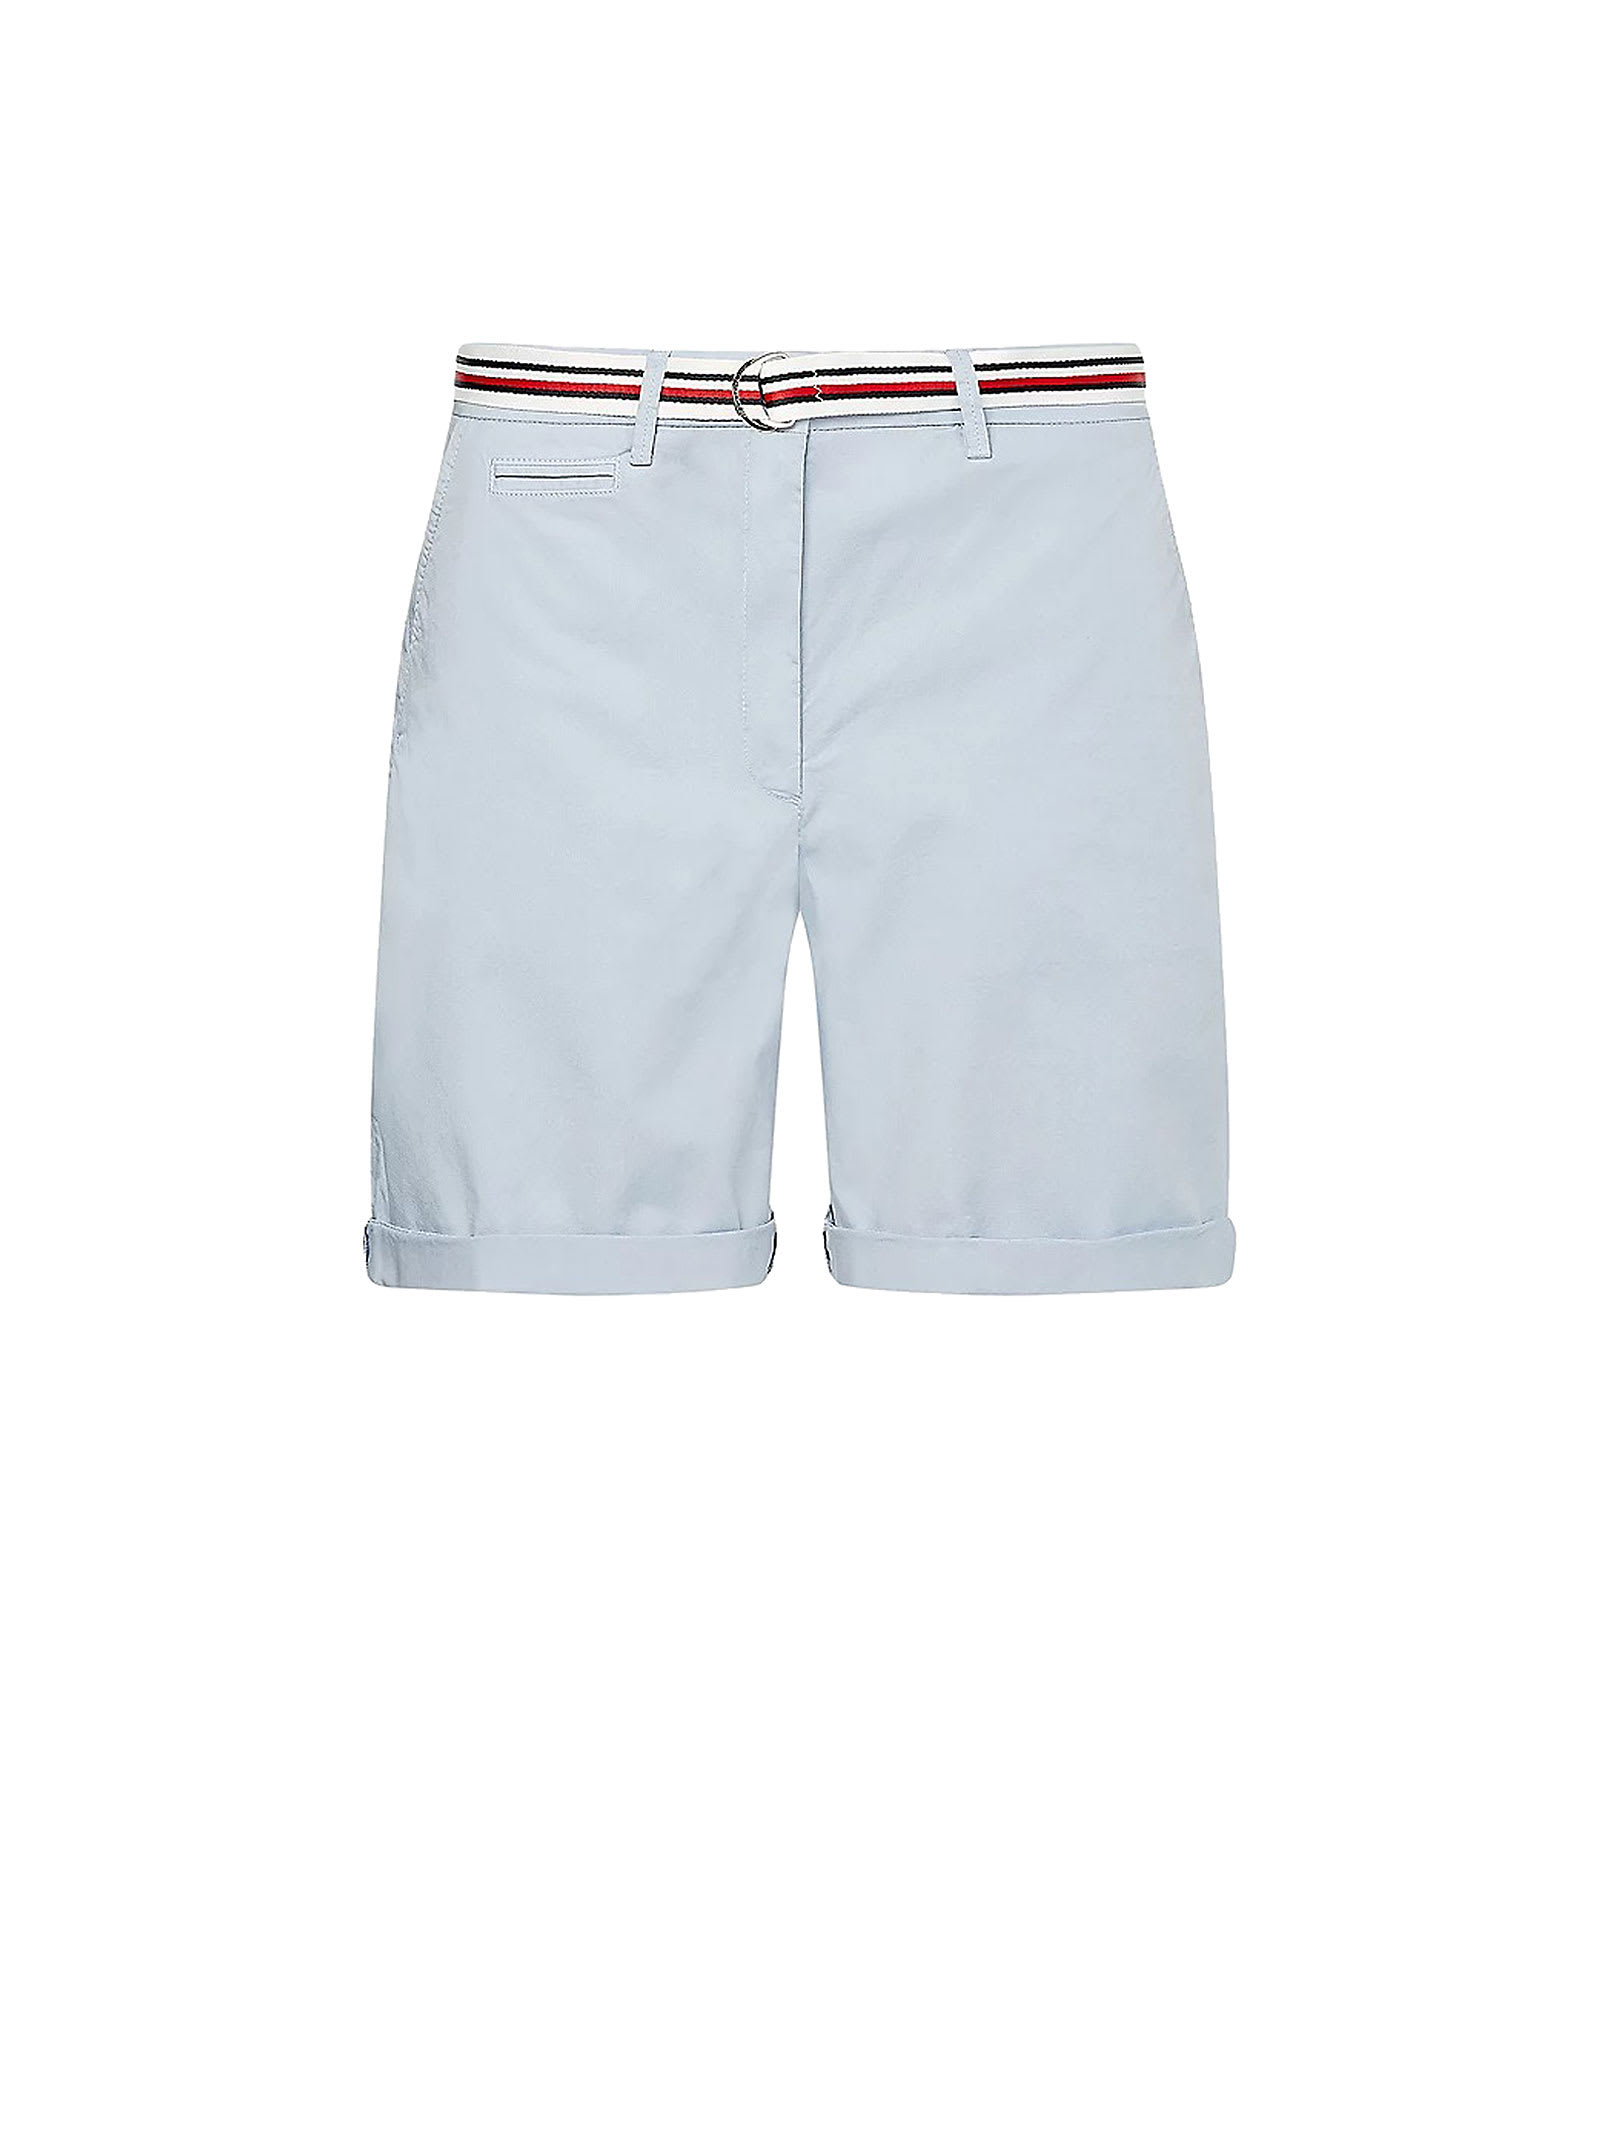 Tommy Hilfiger Bermuda Shorts In Light Blue Colored